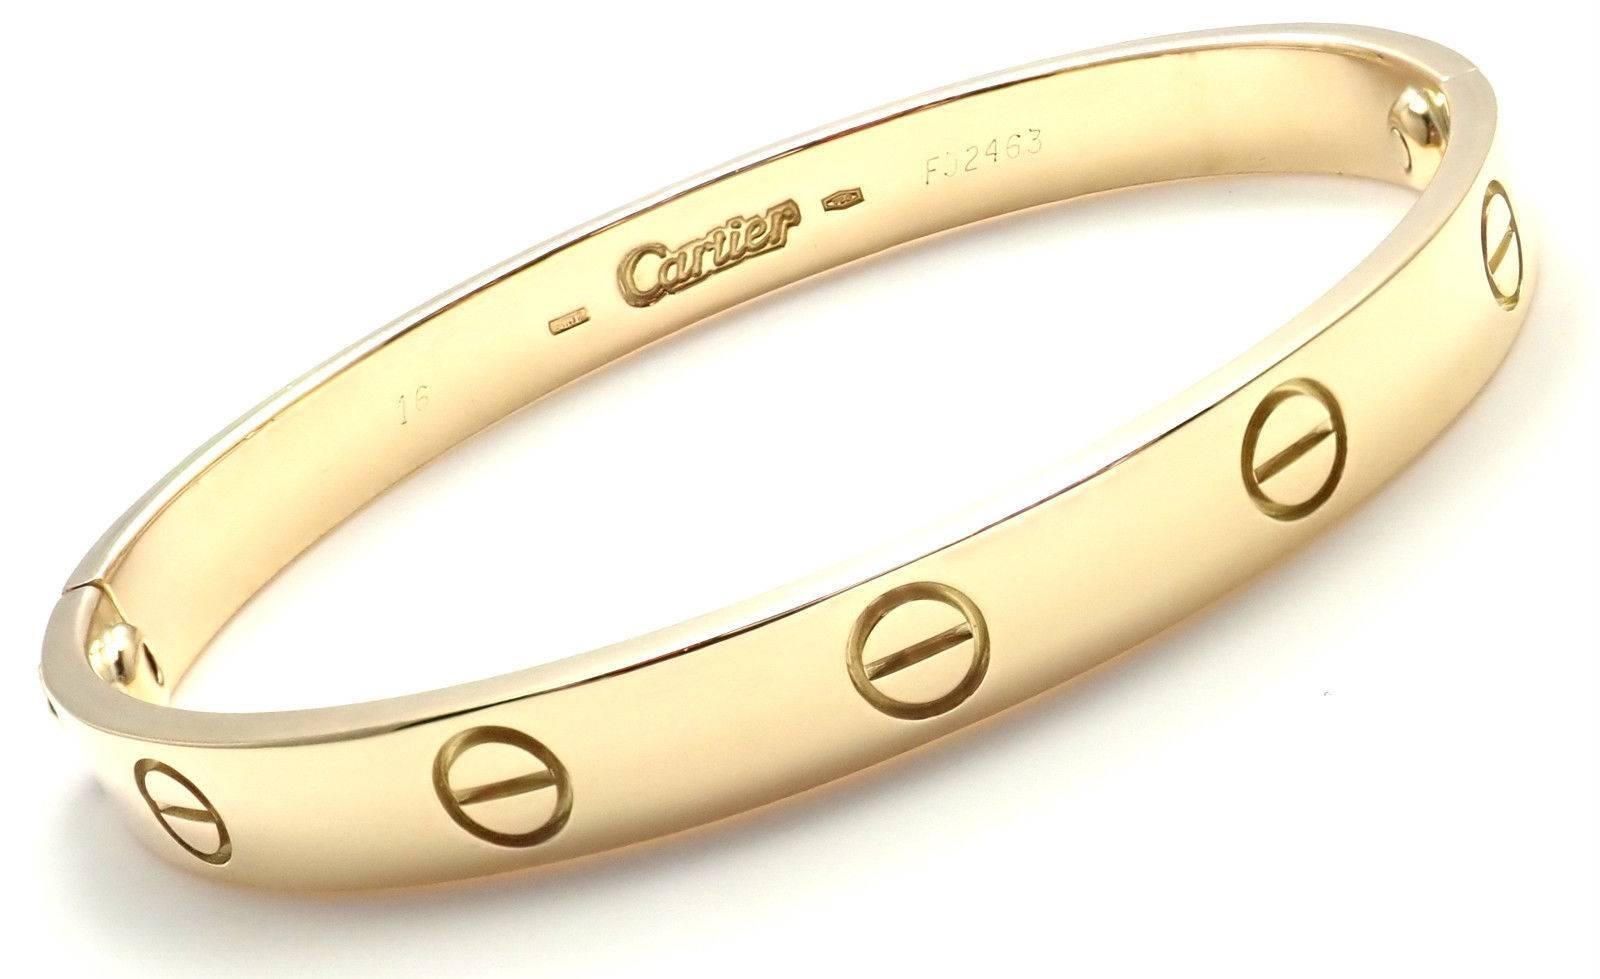 18k Yellow Gold Love Bangle Bracelet by Cartier Size 16.
This bracelet comes with a Cartier box, Cartier certificate a Cartier screwdriver.
Details: 
Size: 16
Weight: 28.7 grams
Width: 6.5mm 
Hallmarks: Cartier 750 16 F92463
*Free Shipping within